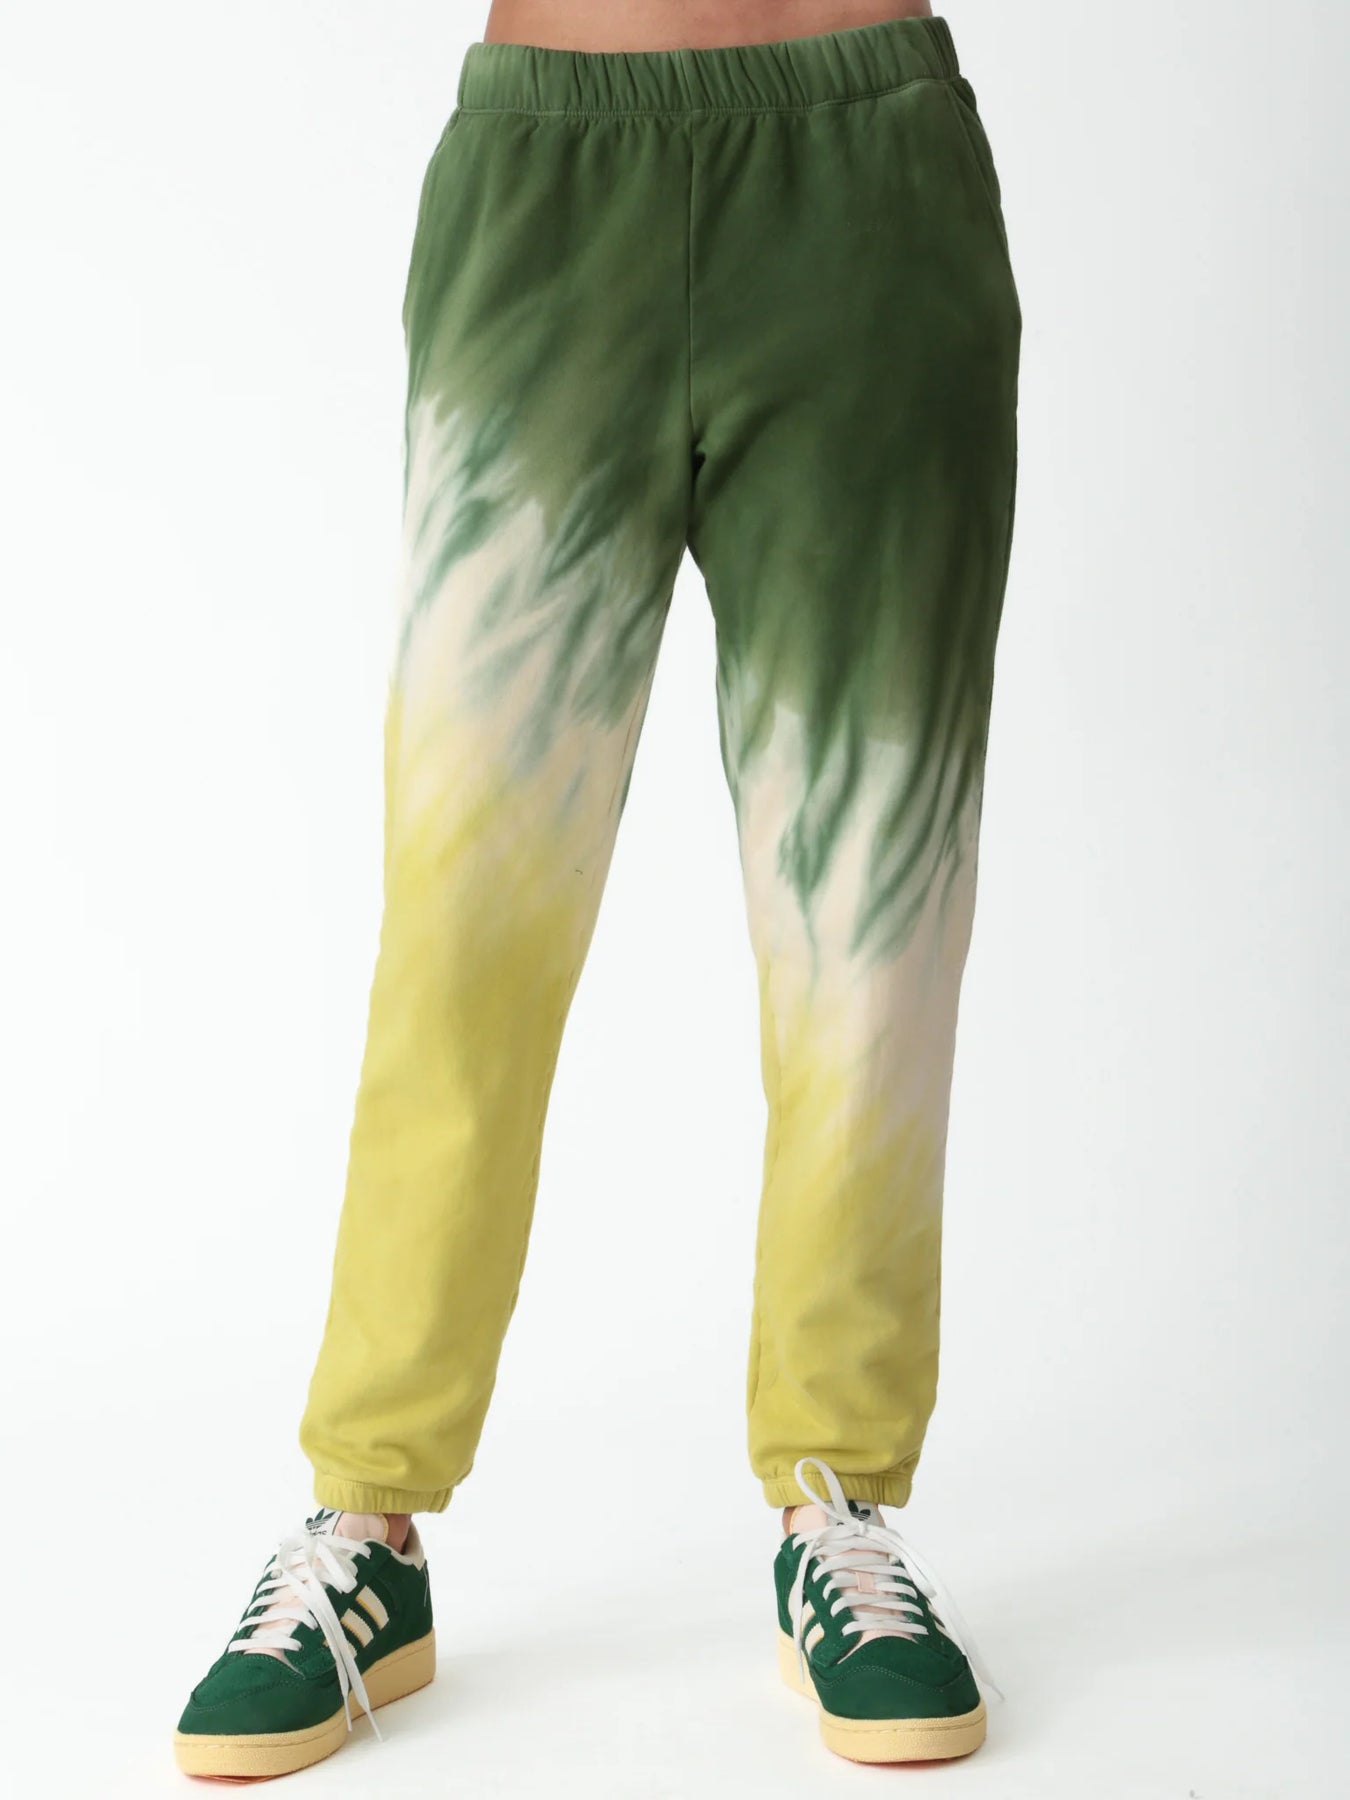 Electric & Rose Siesta Ombre Sweatpants